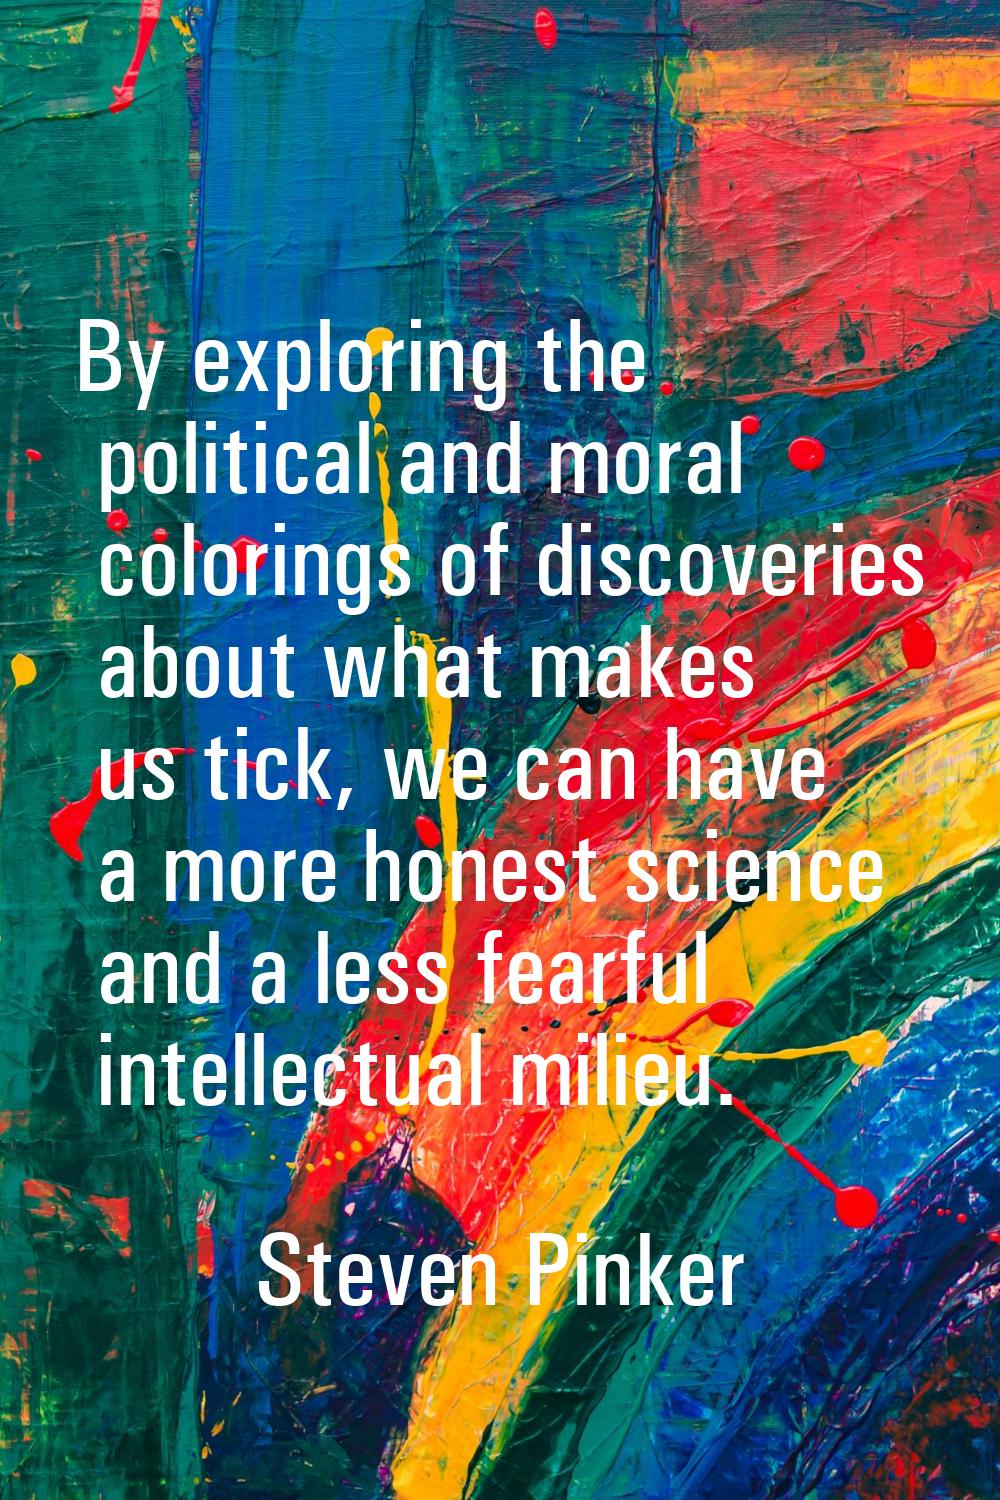 By exploring the political and moral colorings of discoveries about what makes us tick, we can have